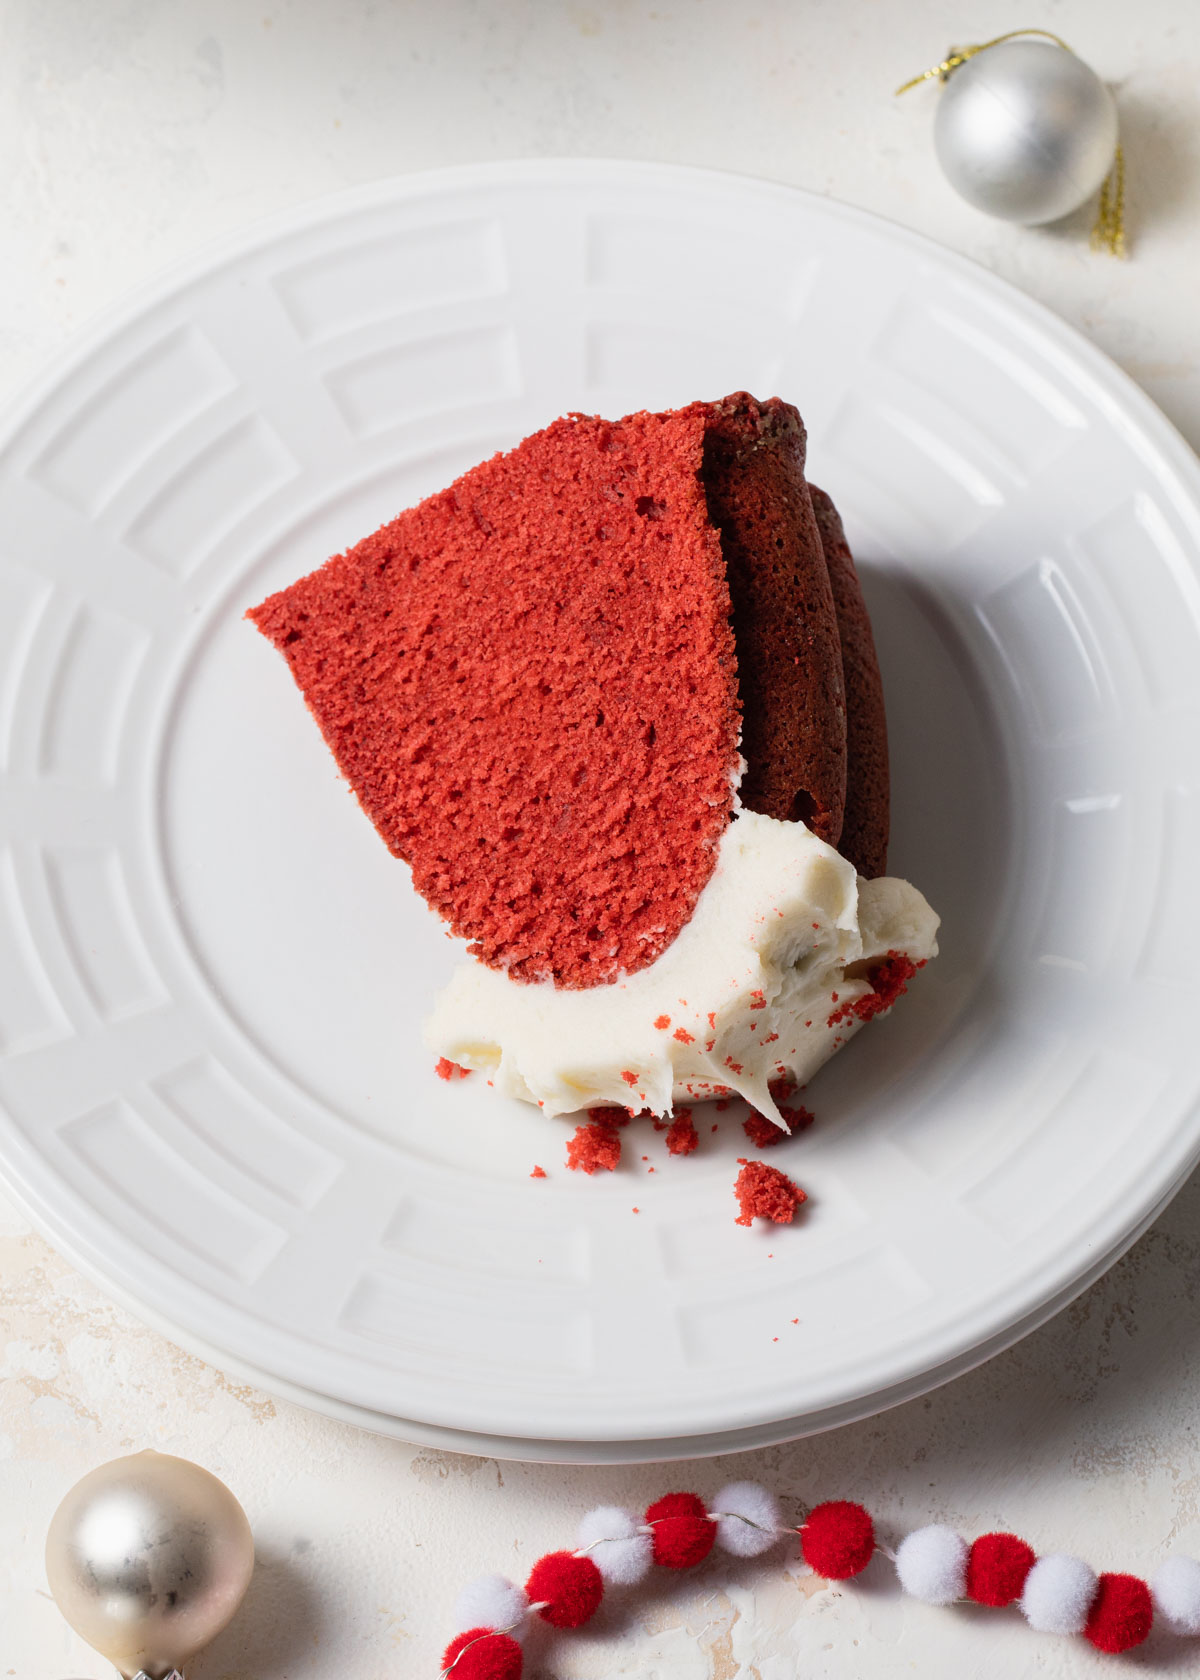 A thick slice of red velvet cake on a white plate with cream cheese frosting